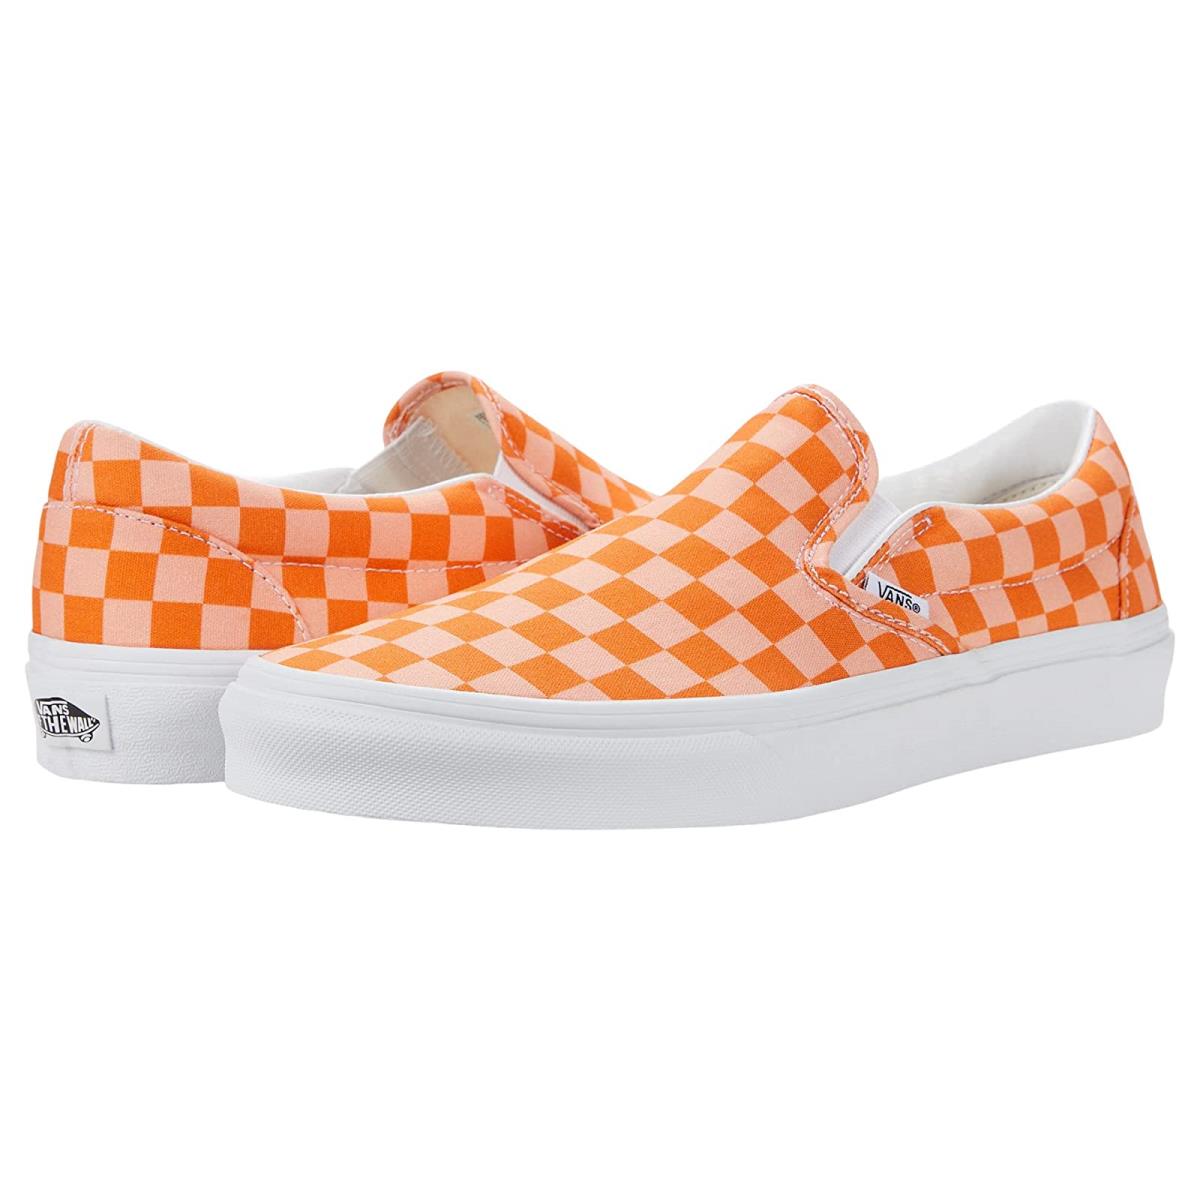 Unisex Sneakers Athletic Shoes Vans Classic Slip-on Checkerboard Peach Nectar